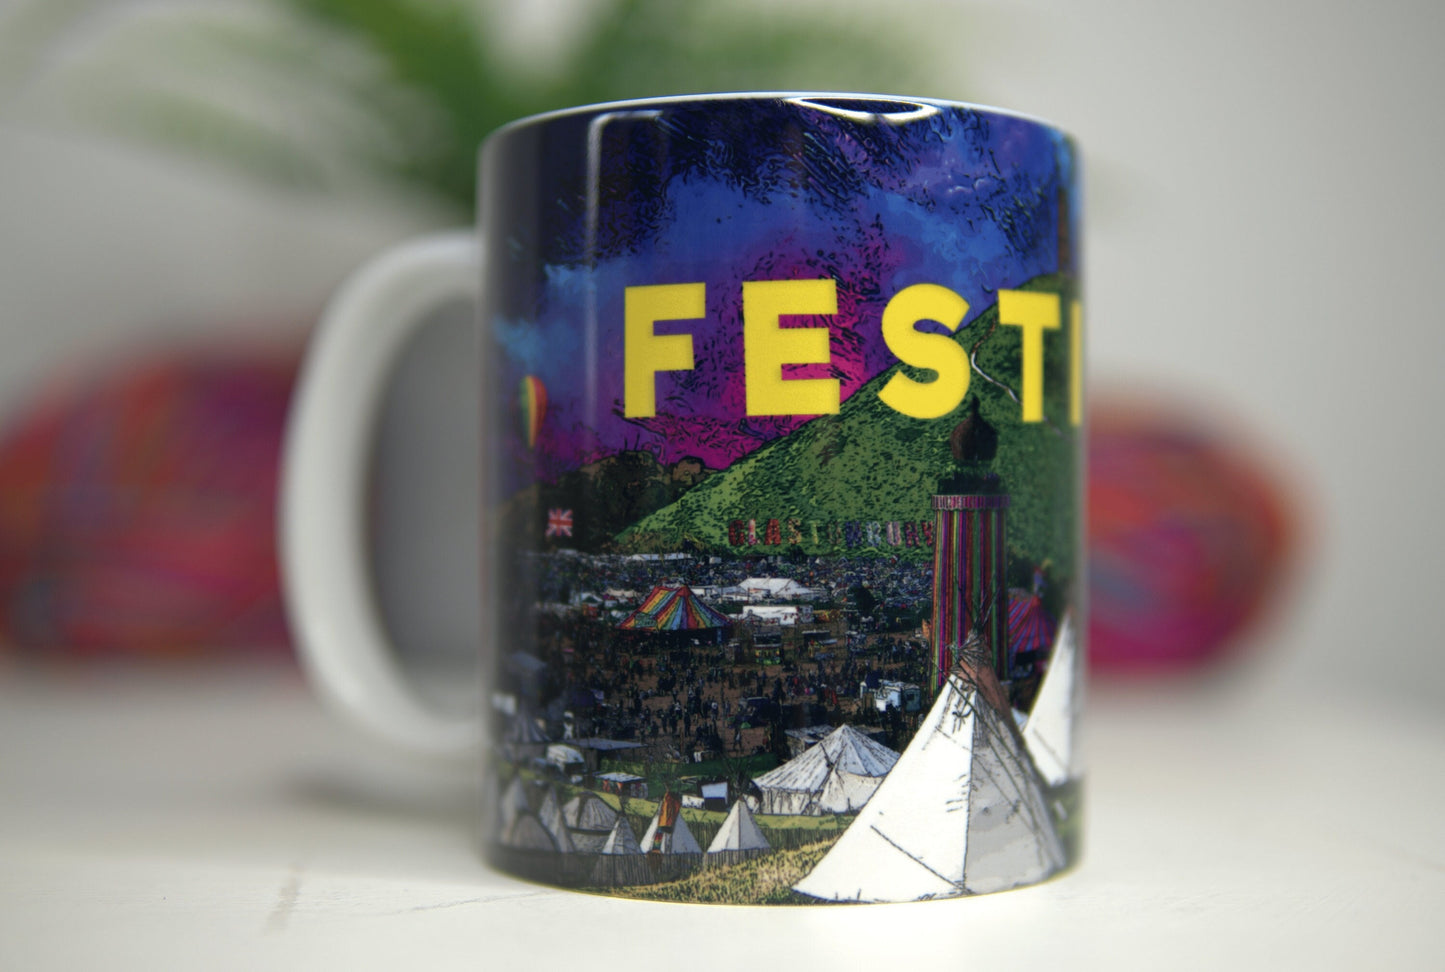 11oz Glastonbury Festival Mug - Day Time Theme Cup - Parklife download reading and leeds fest Creamfields sound city cup - Festival Merch